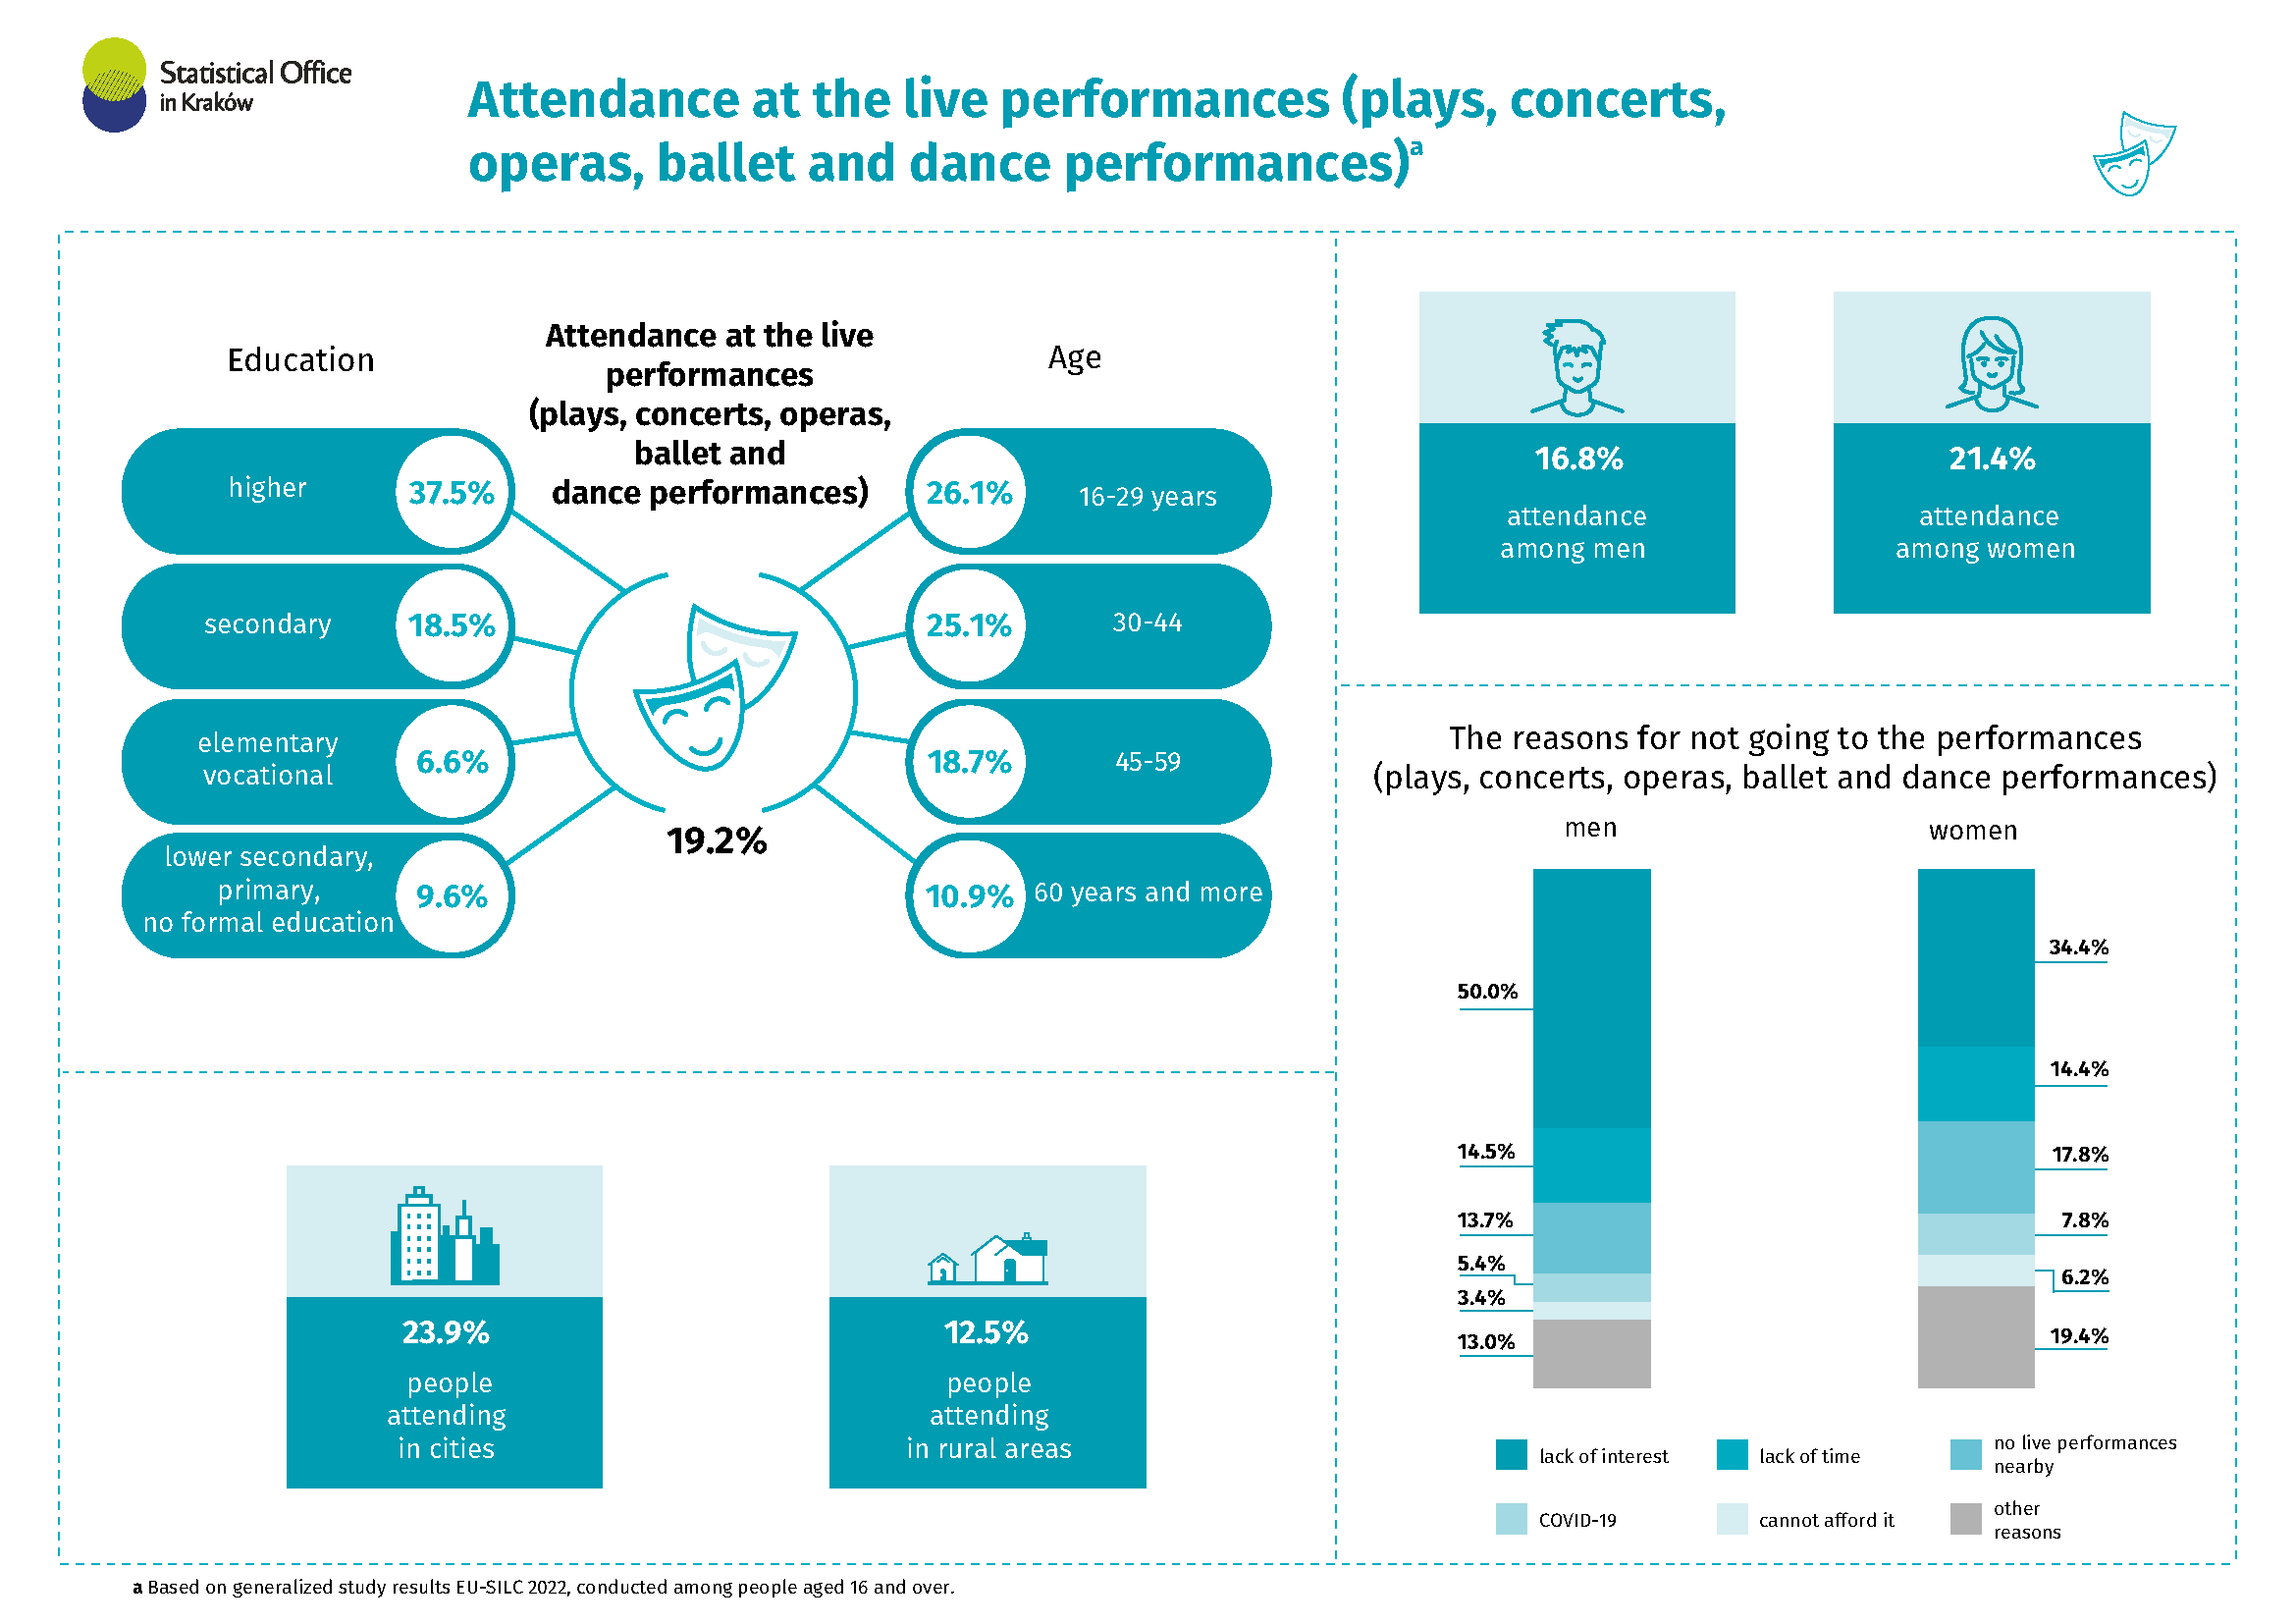 Attendance at the live performances (plays, concerts, operas, ballet and dance performances) in 2022 (International Theater Day infographic)